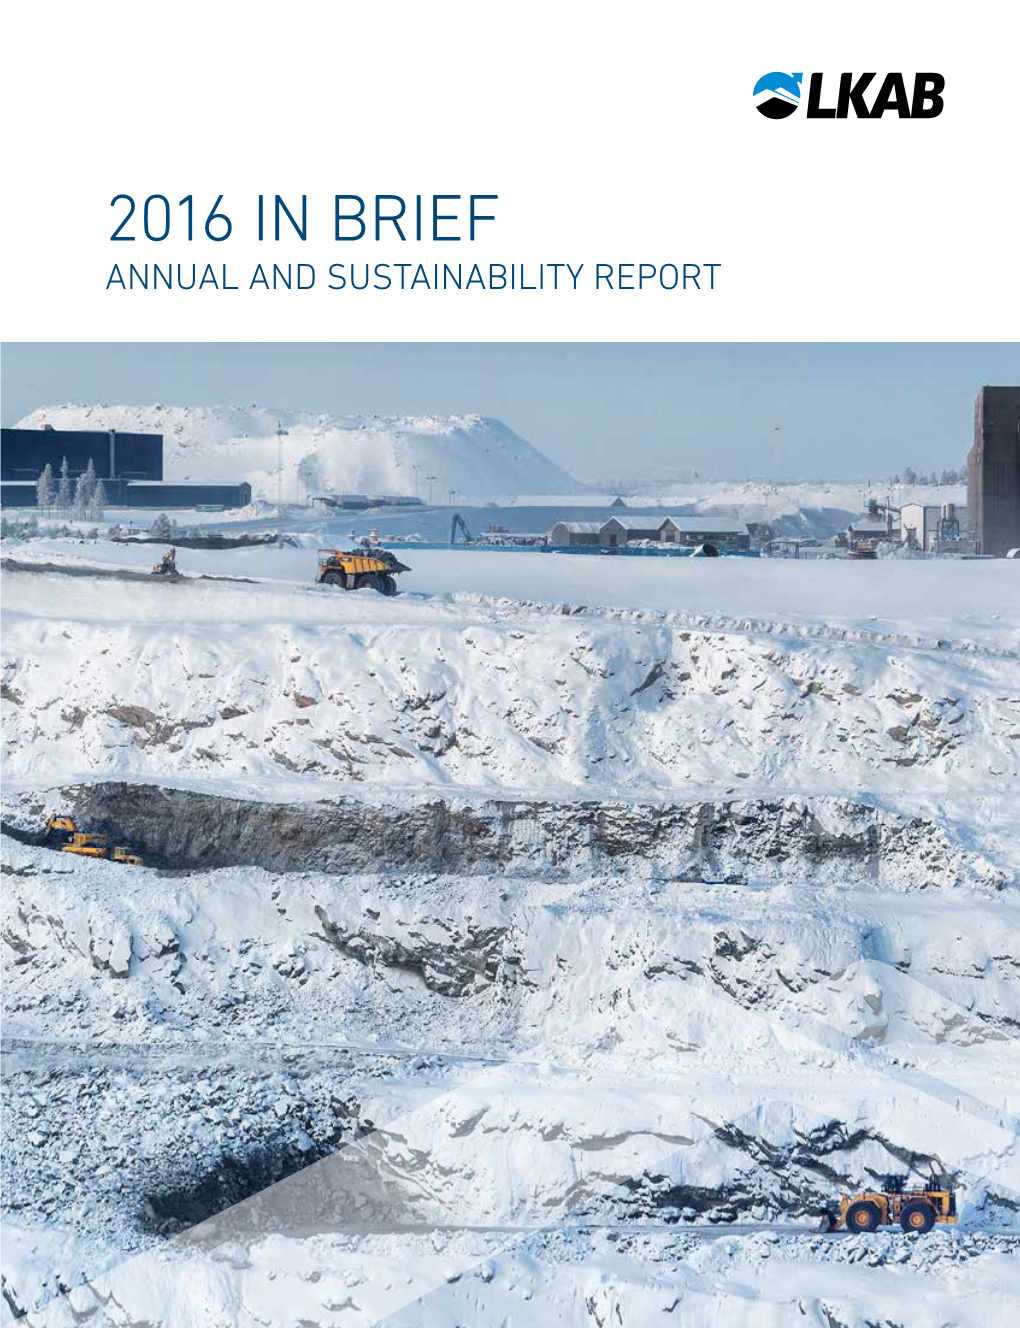 2016 in Brief Annual and Sustainability Report the Year in Numbers